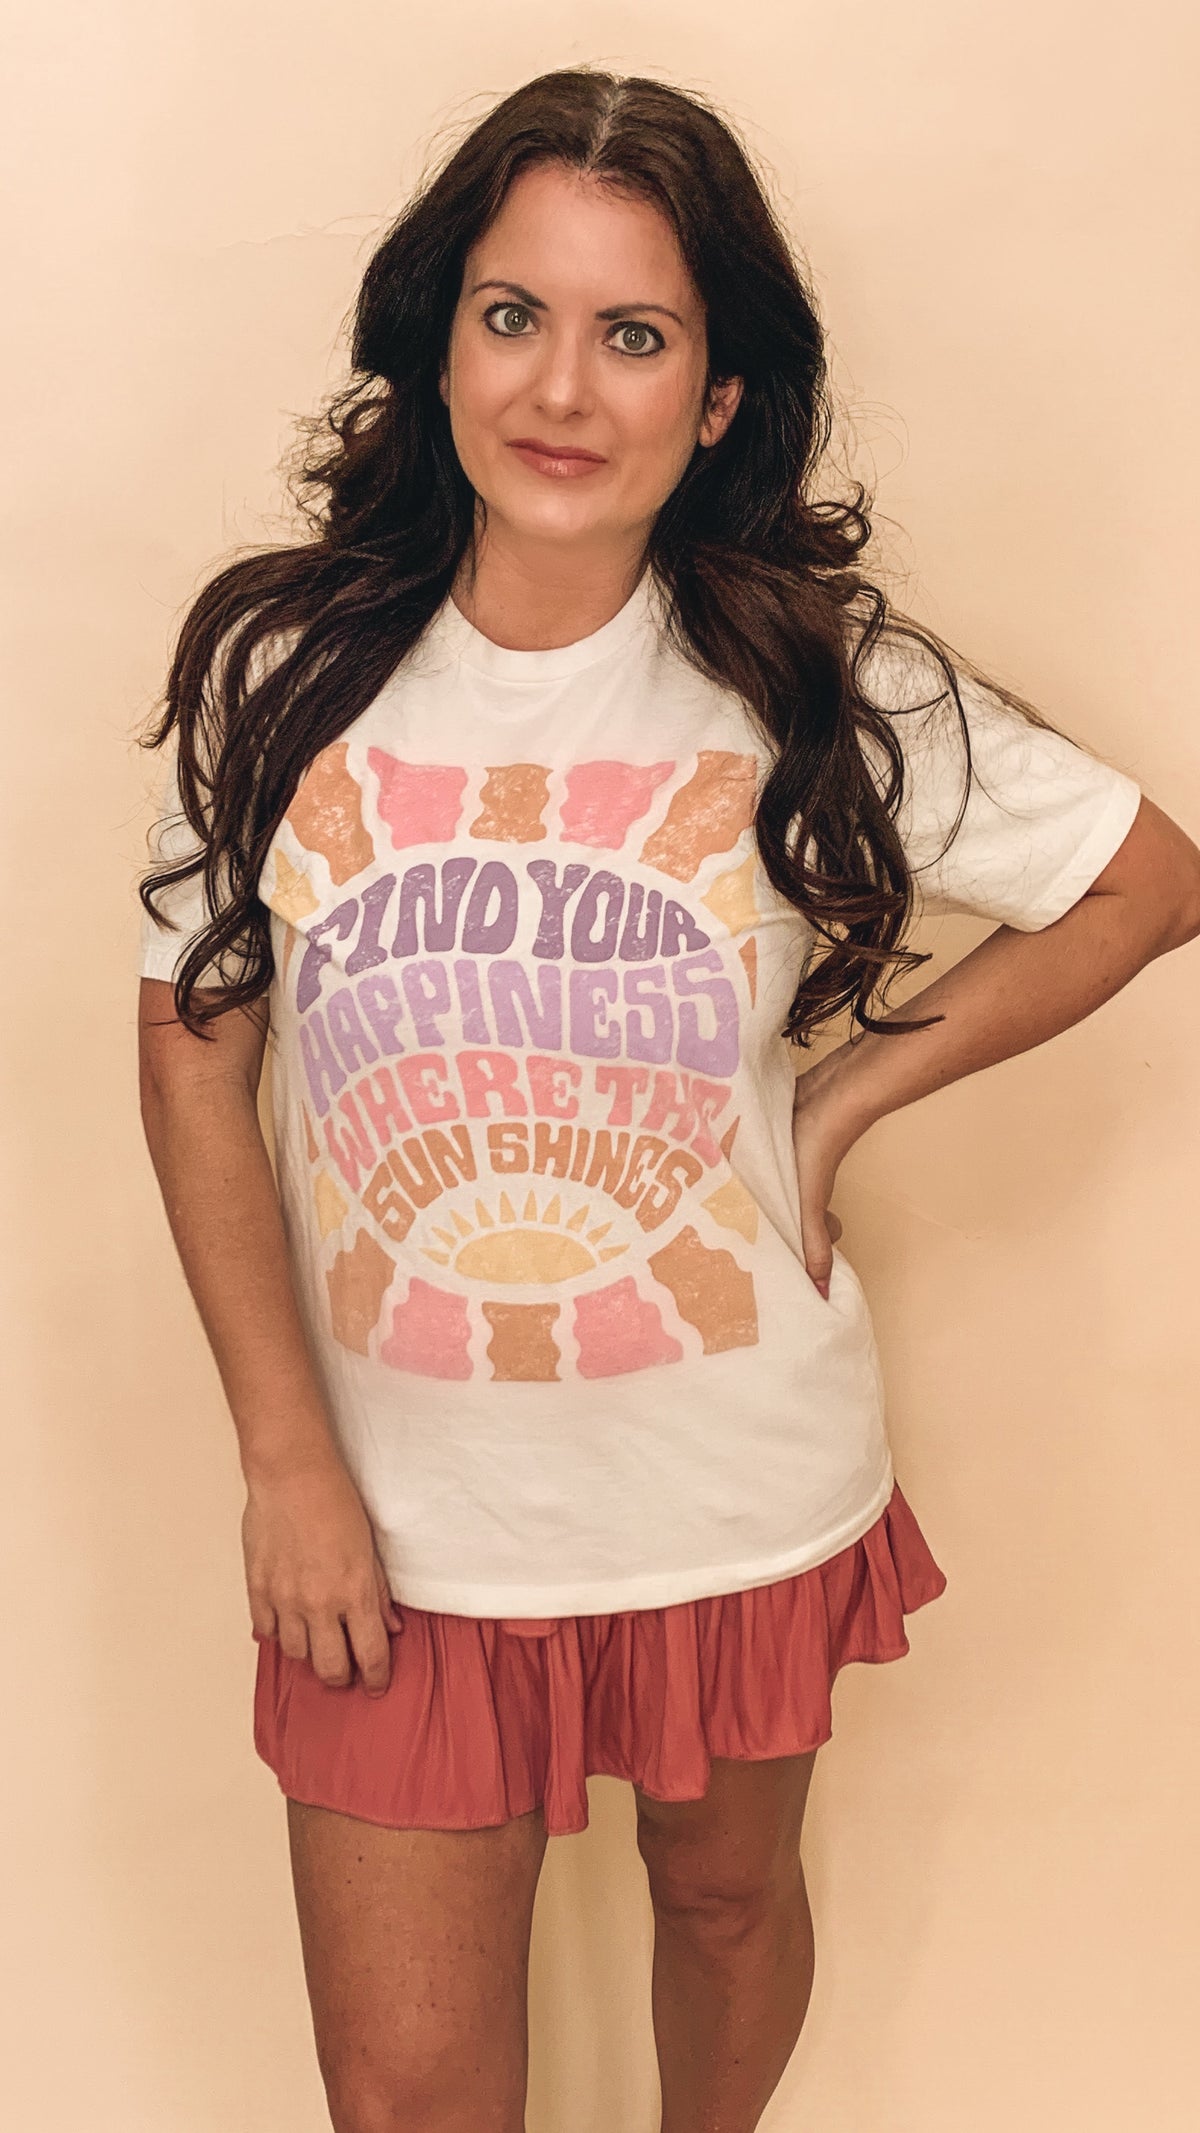 Find Your Happiness Graphic Top